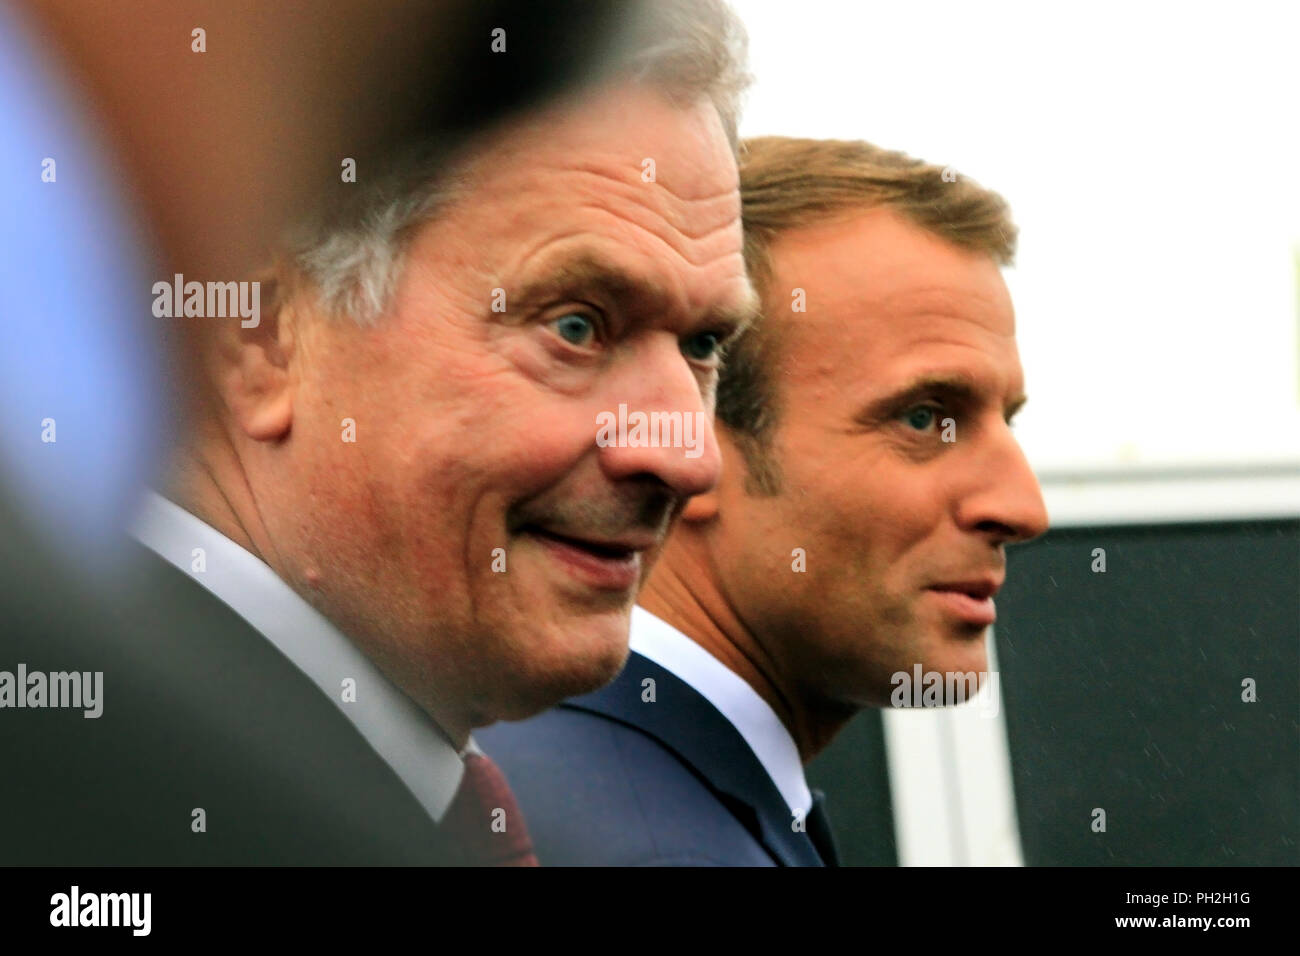 Helsinki, Finland. August 30, 2018. Finnish President Sauli Niinistö (L) and French President Emmanuel Macron (R) take a walk on the Market Square after their joint press conference. Credit: Taina Sohlman/Alamy Live News. - Note: Full size image shows imperfections. Stock Photo